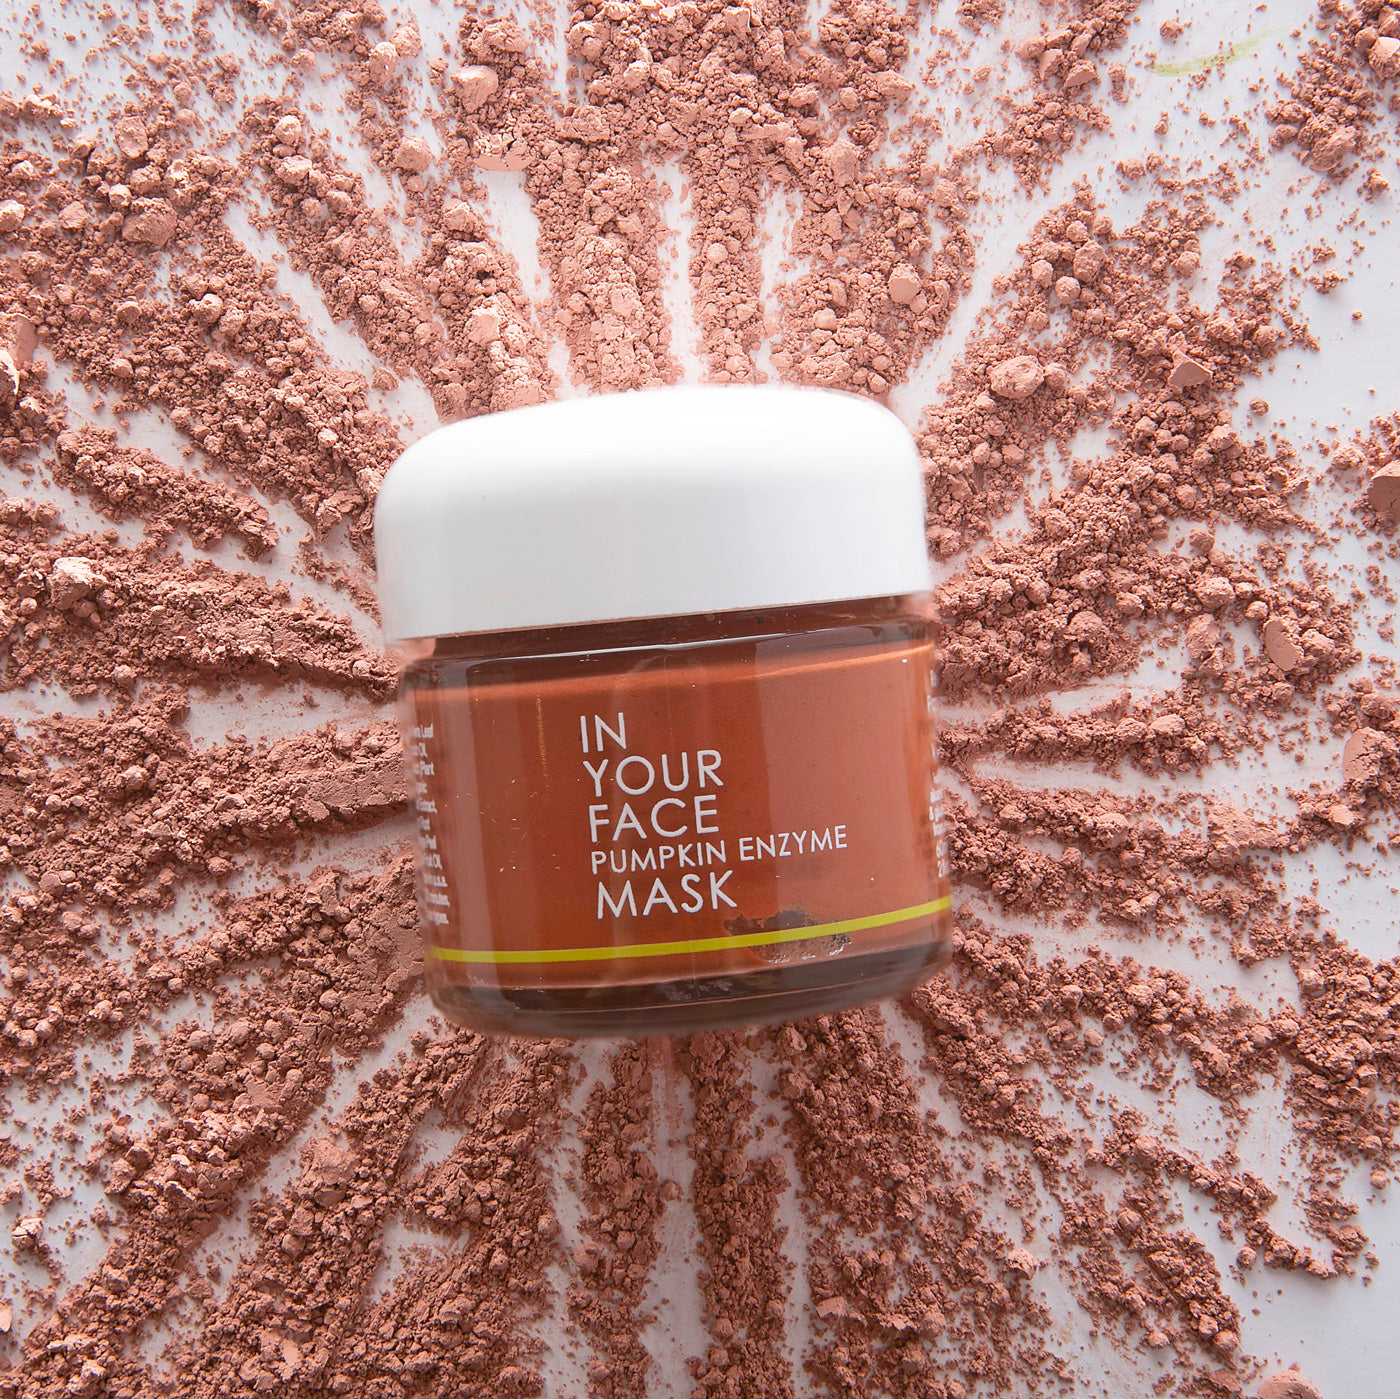 In Your Face PUMPKIN ENZYME MASK